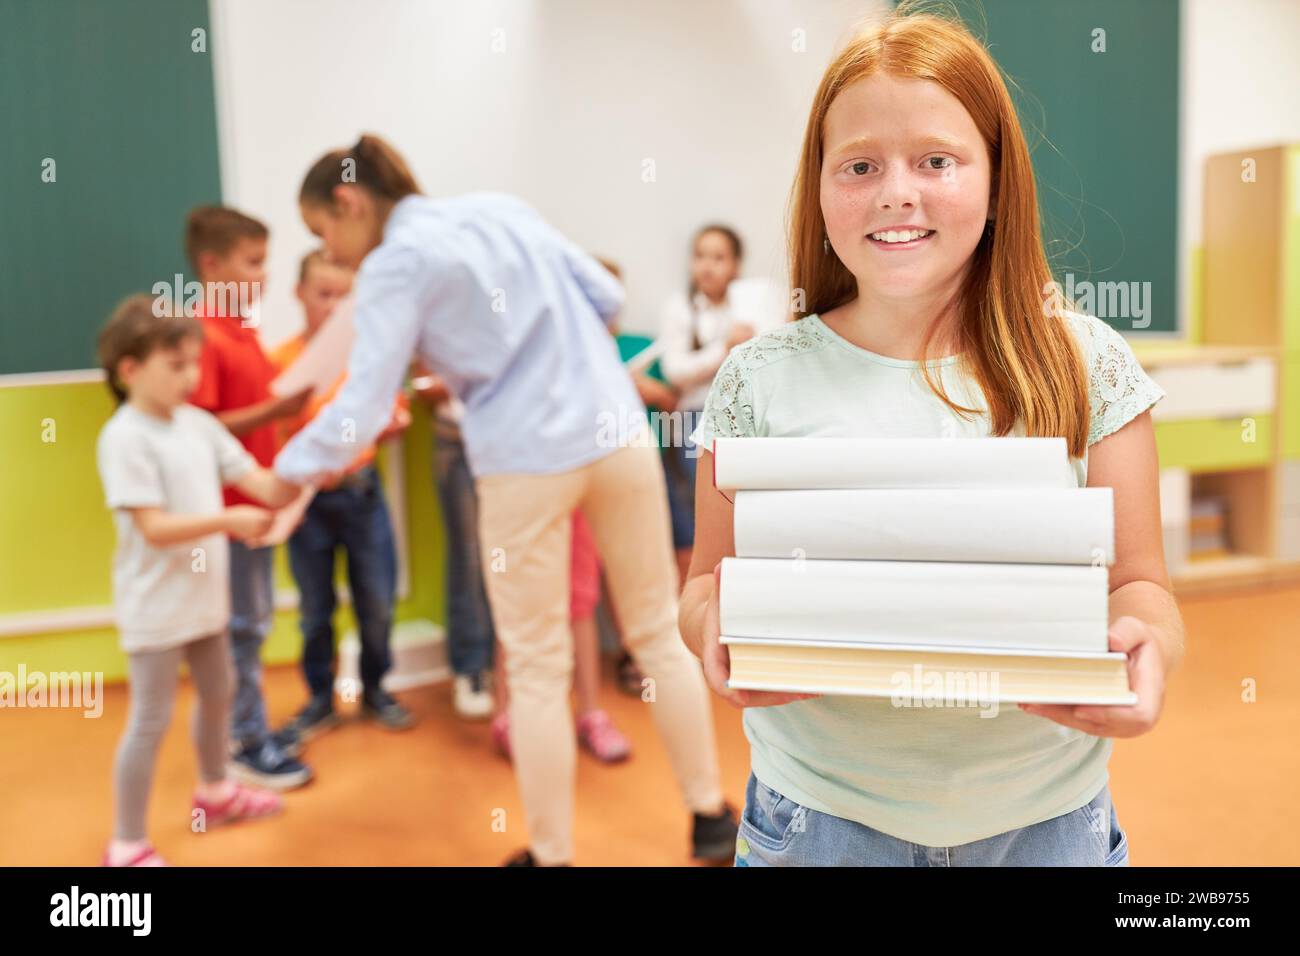 Portrait of smiling redhead schoolgirl holding stack of books while standing in class Stock Photo